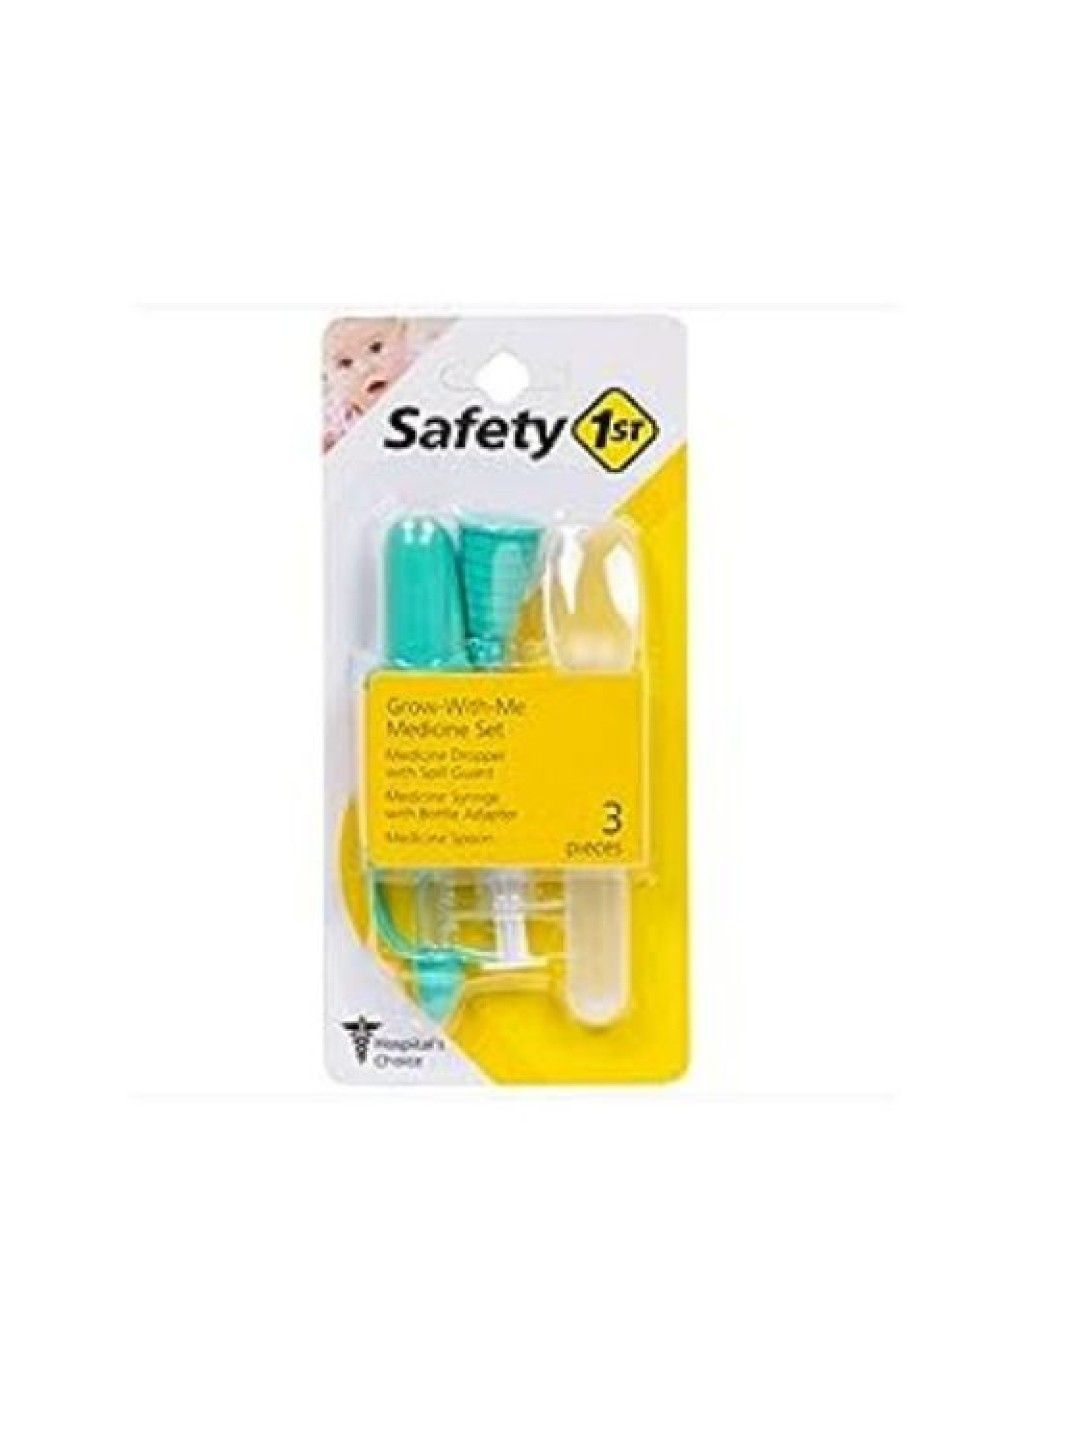 Safety 1st Grow-With-Me Medicine Set (No Color- Image 2)